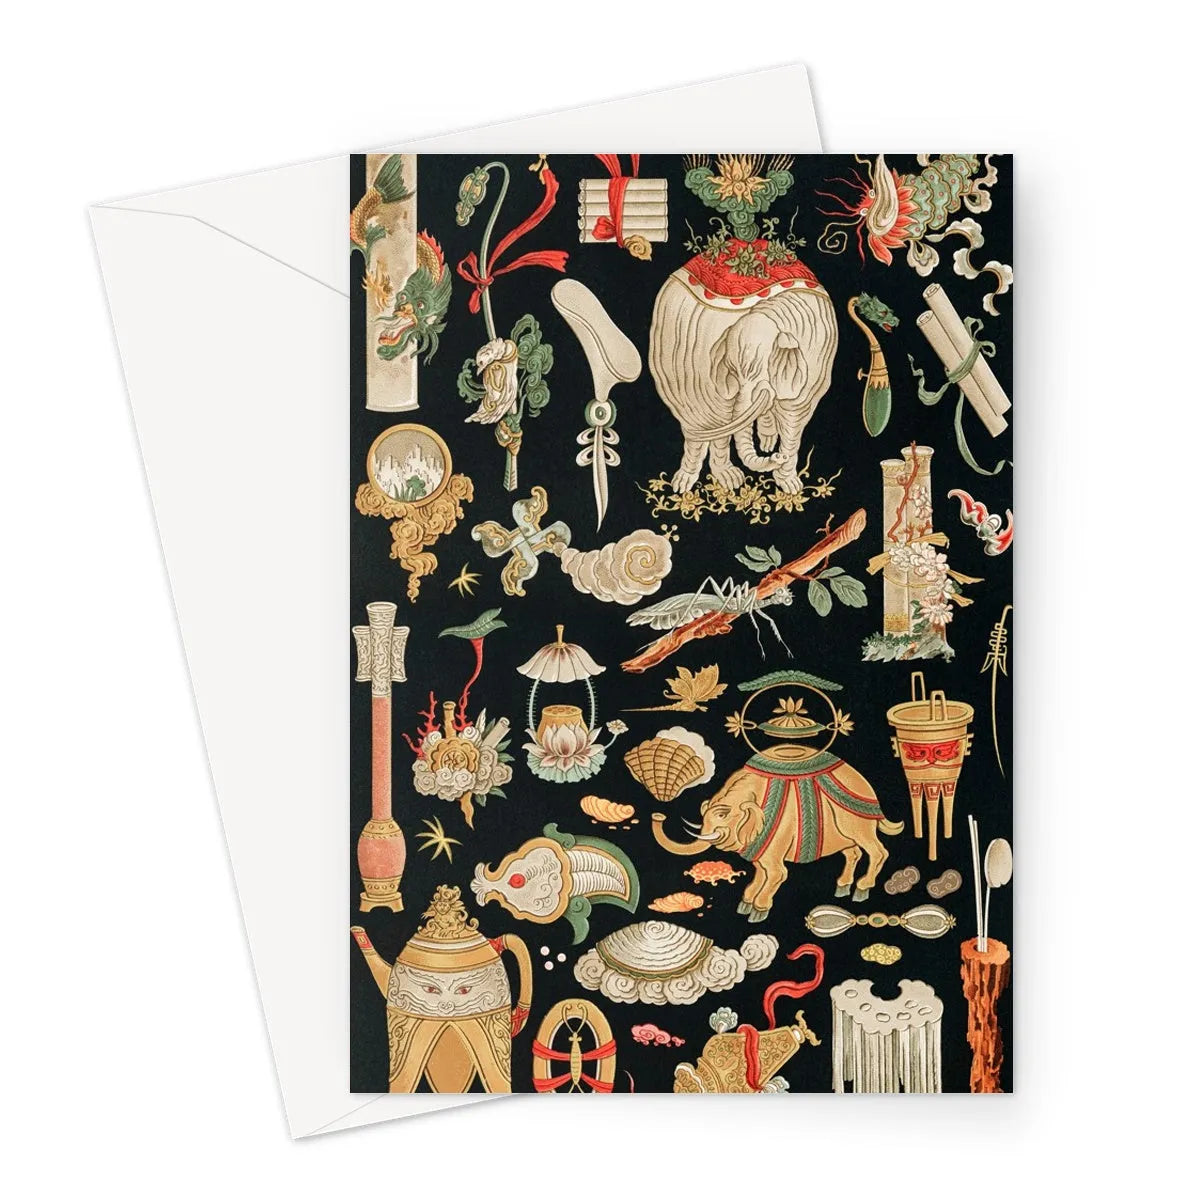 That Chinese Pattern By Auguste Racinet Greeting Card - A5 Portrait / 1 Card - Greeting & Note Cards - Aesthetic Art